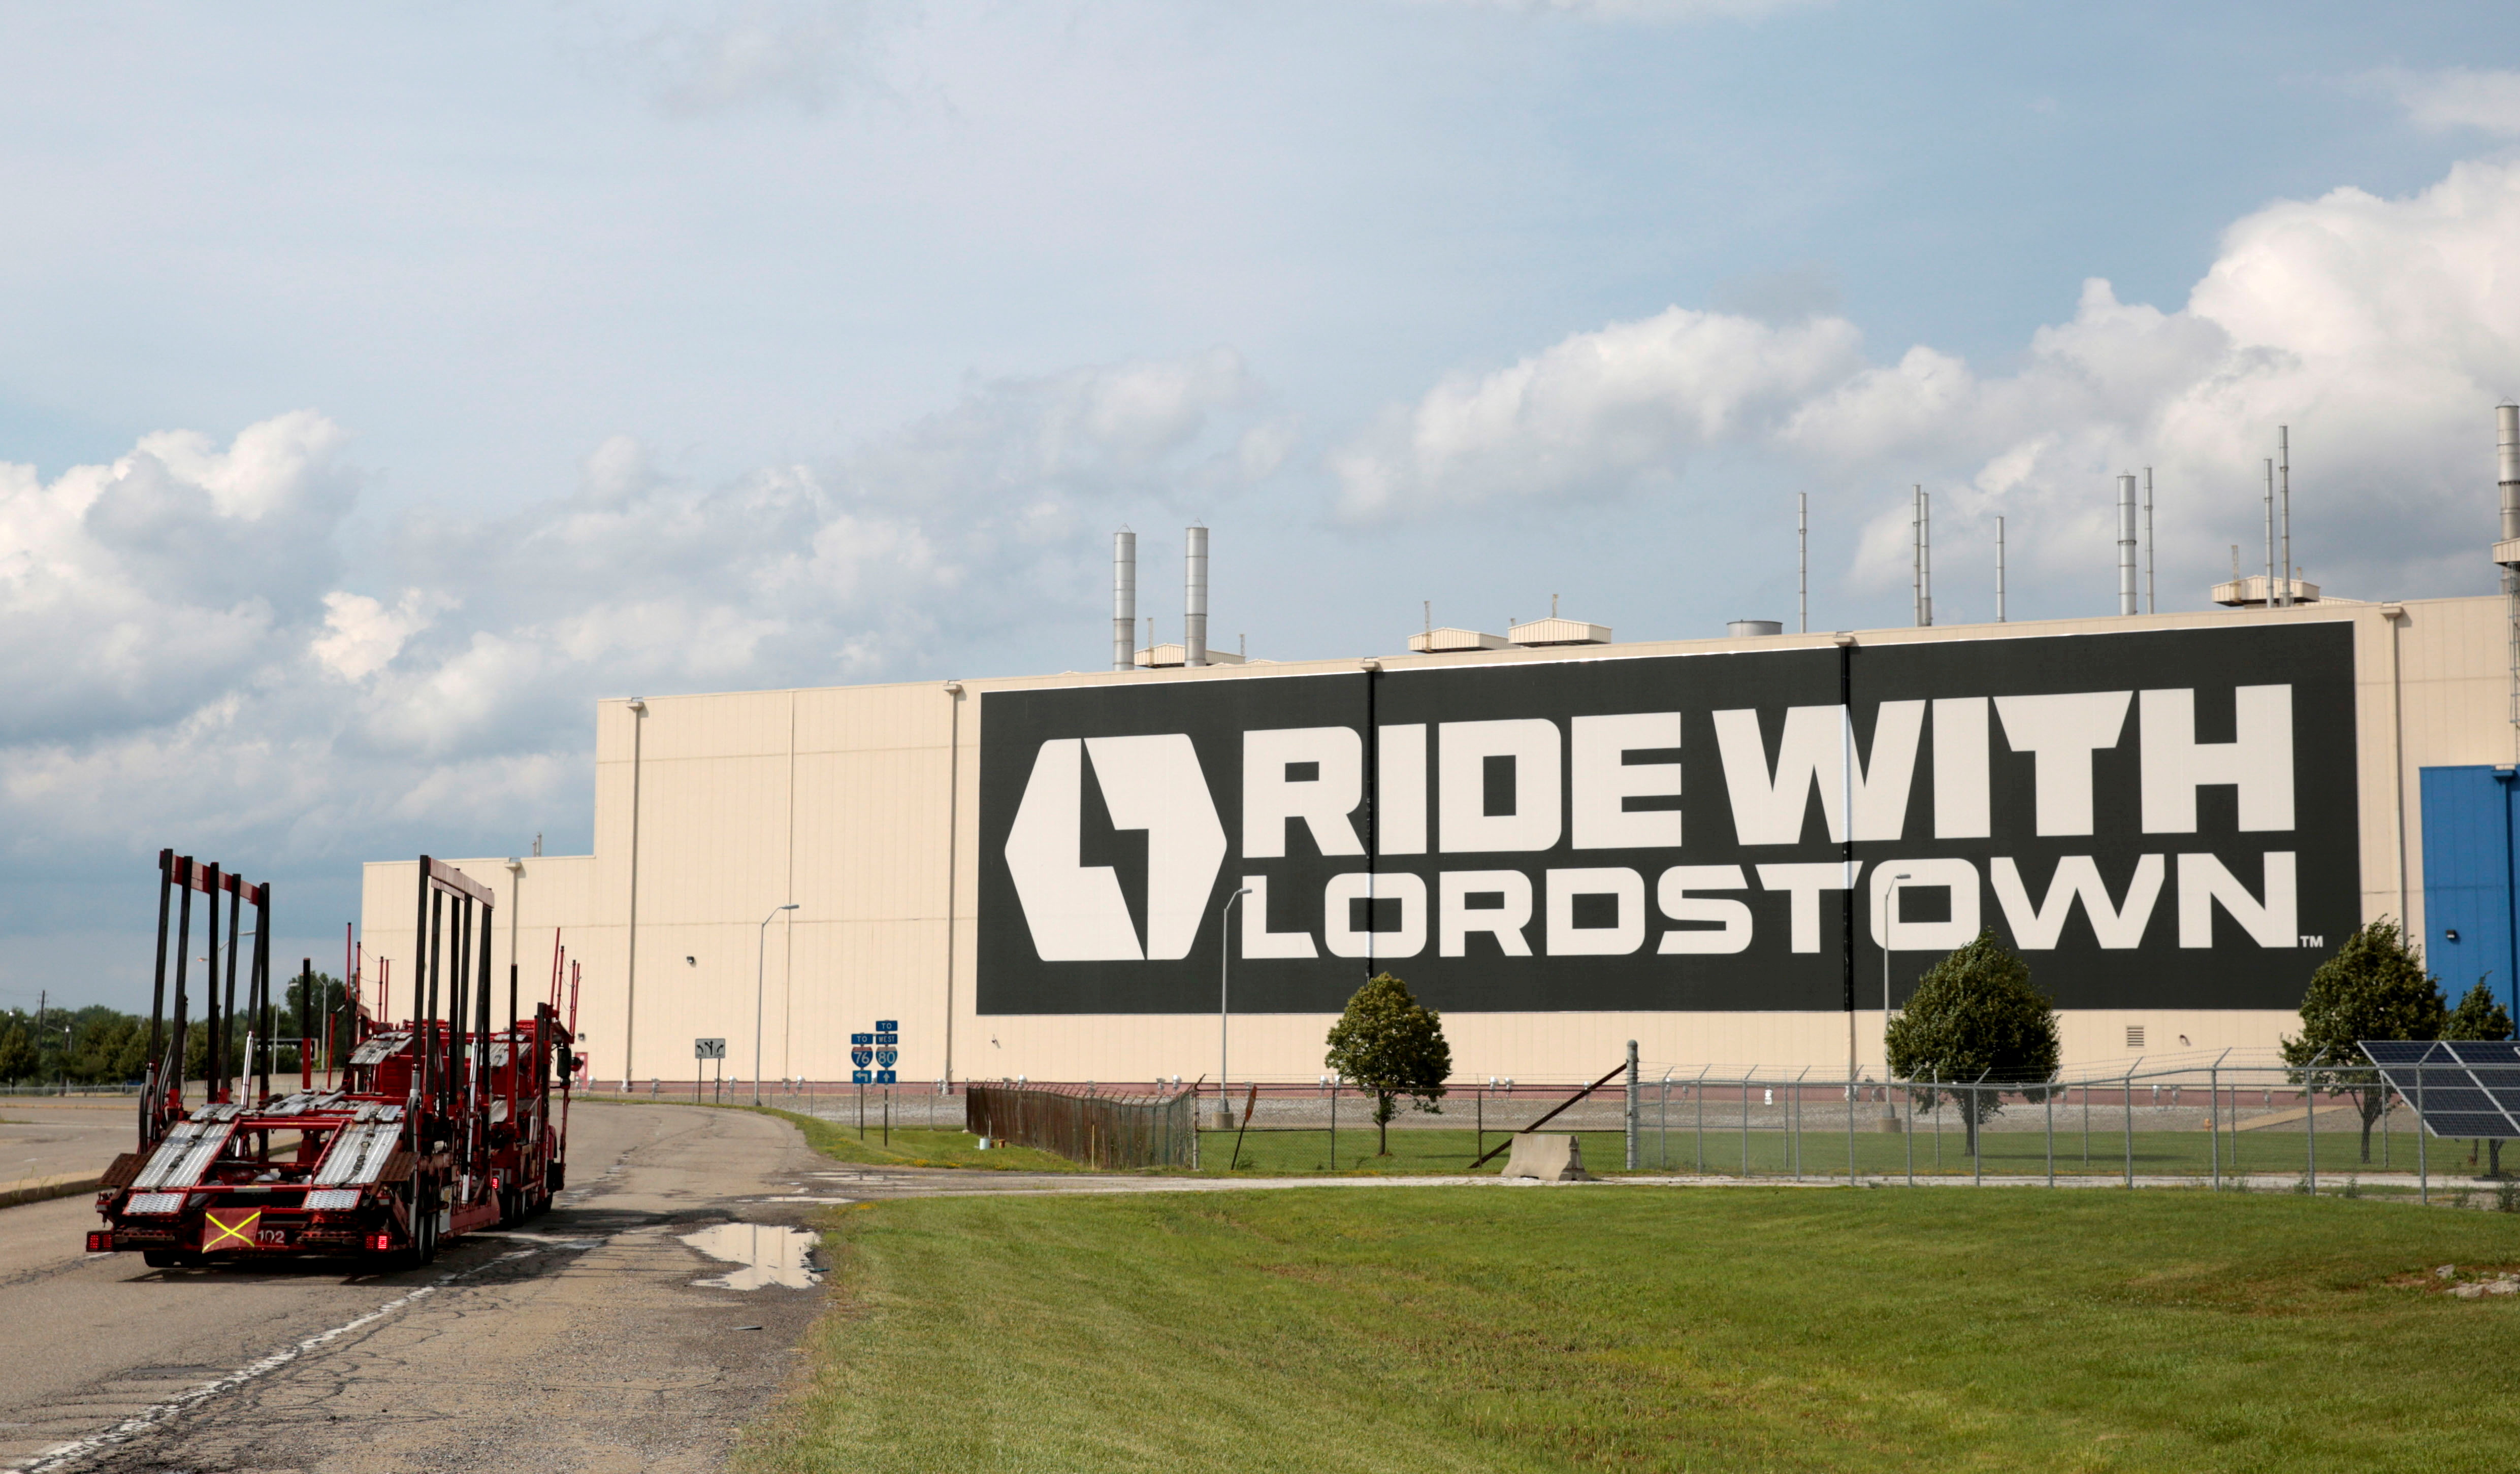 A 'Ride With Lordstown' sign is seen outside the Lordstown Assembly Plant